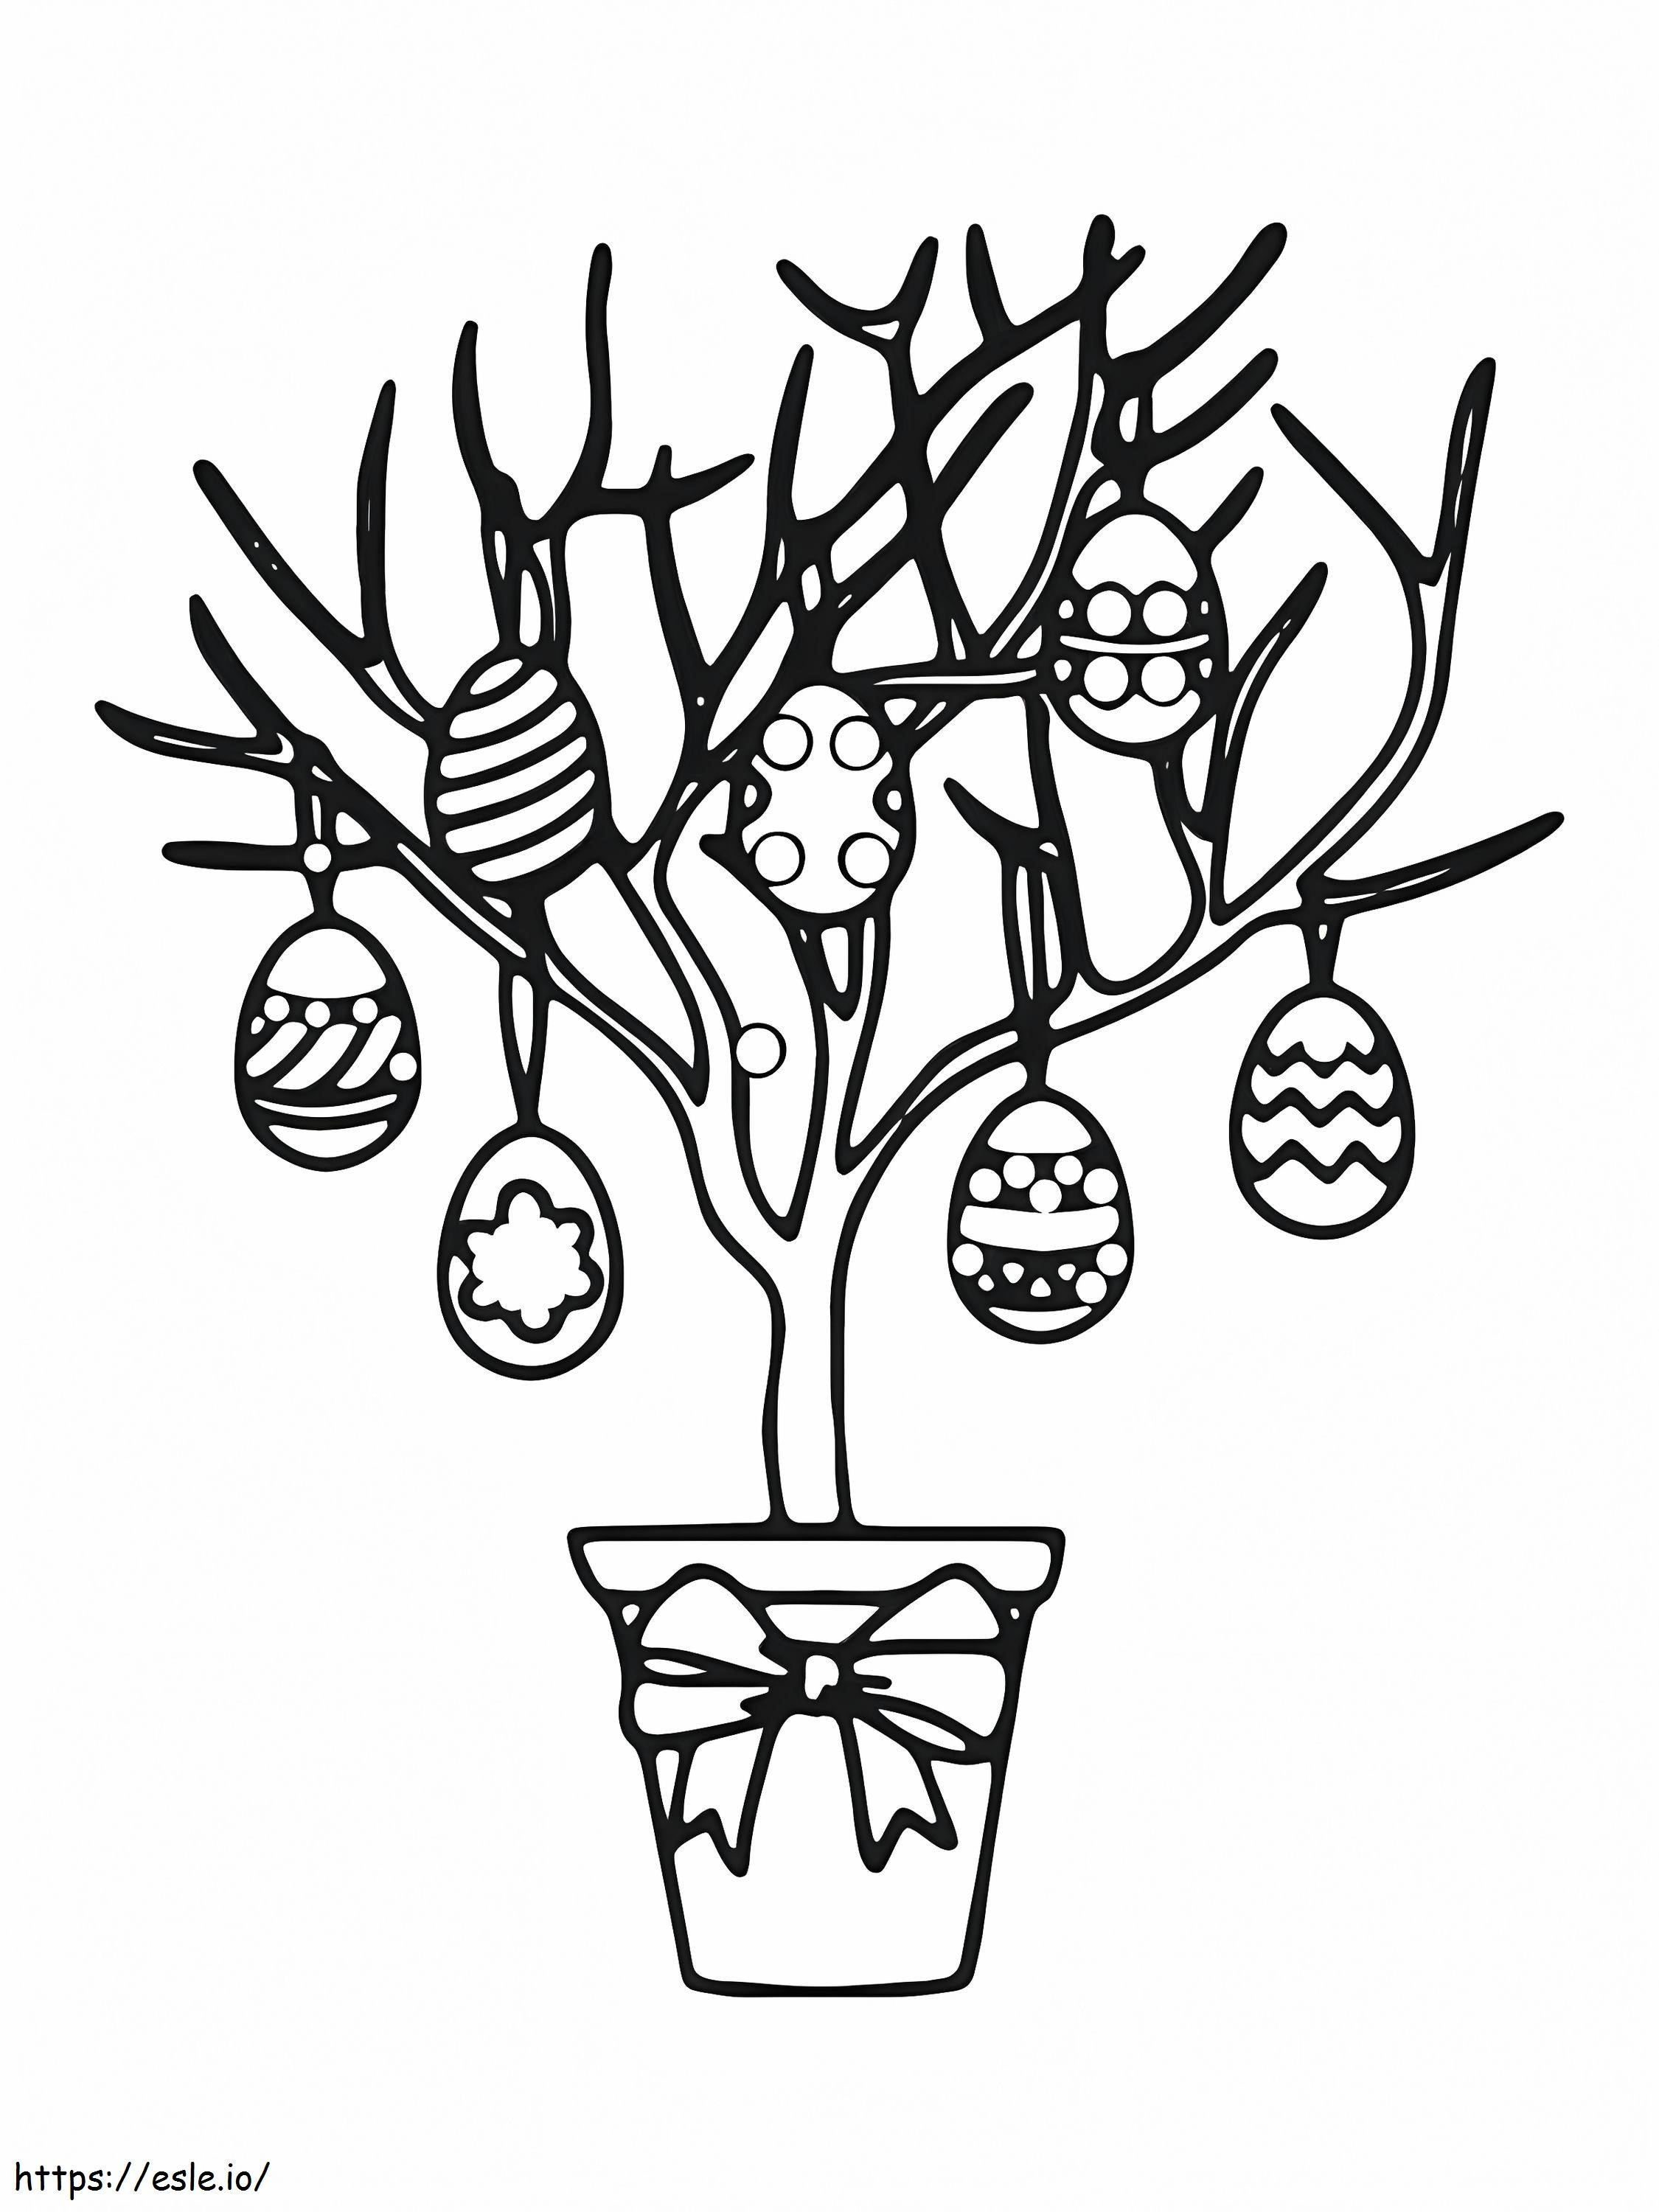 Glad Easter 3 coloring page